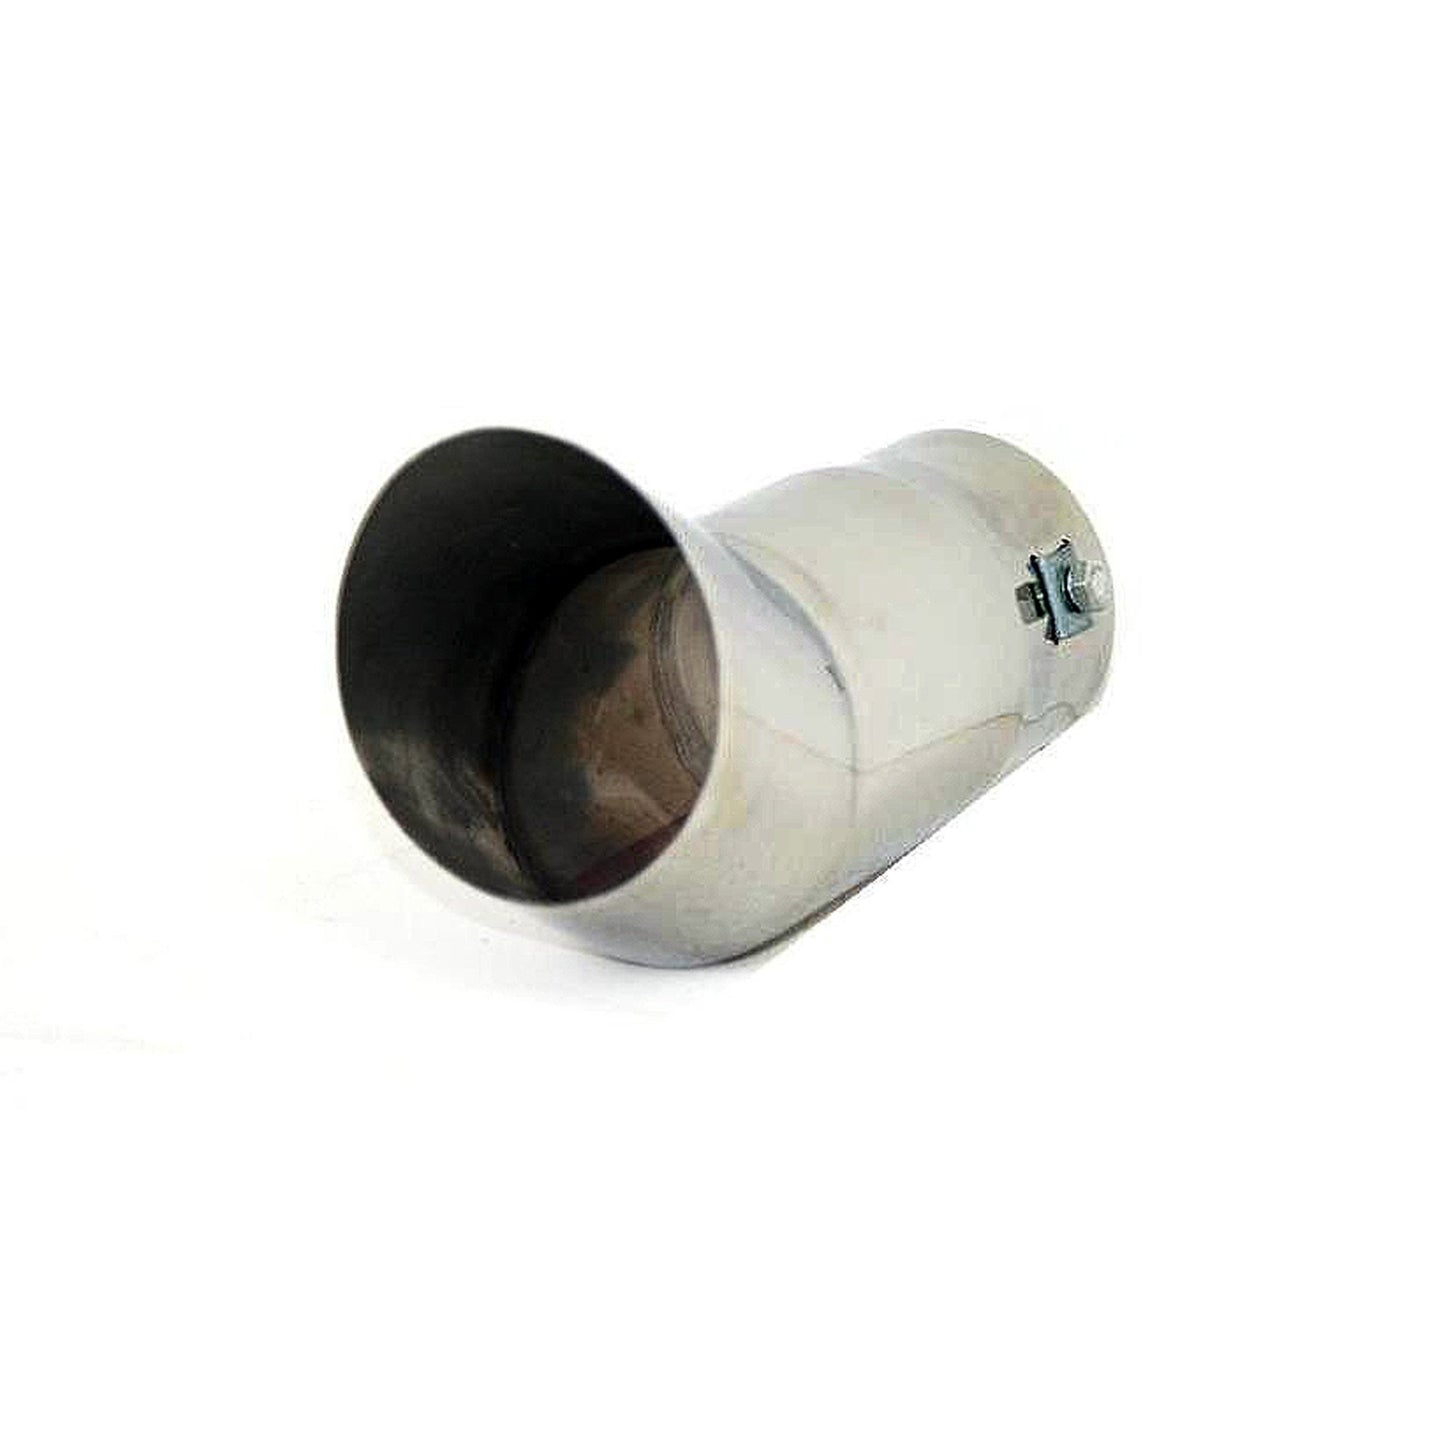 3.5 Inch Diameter Single Stainless Steel Angled Exhaust Tip -  - sold by Direct4x4